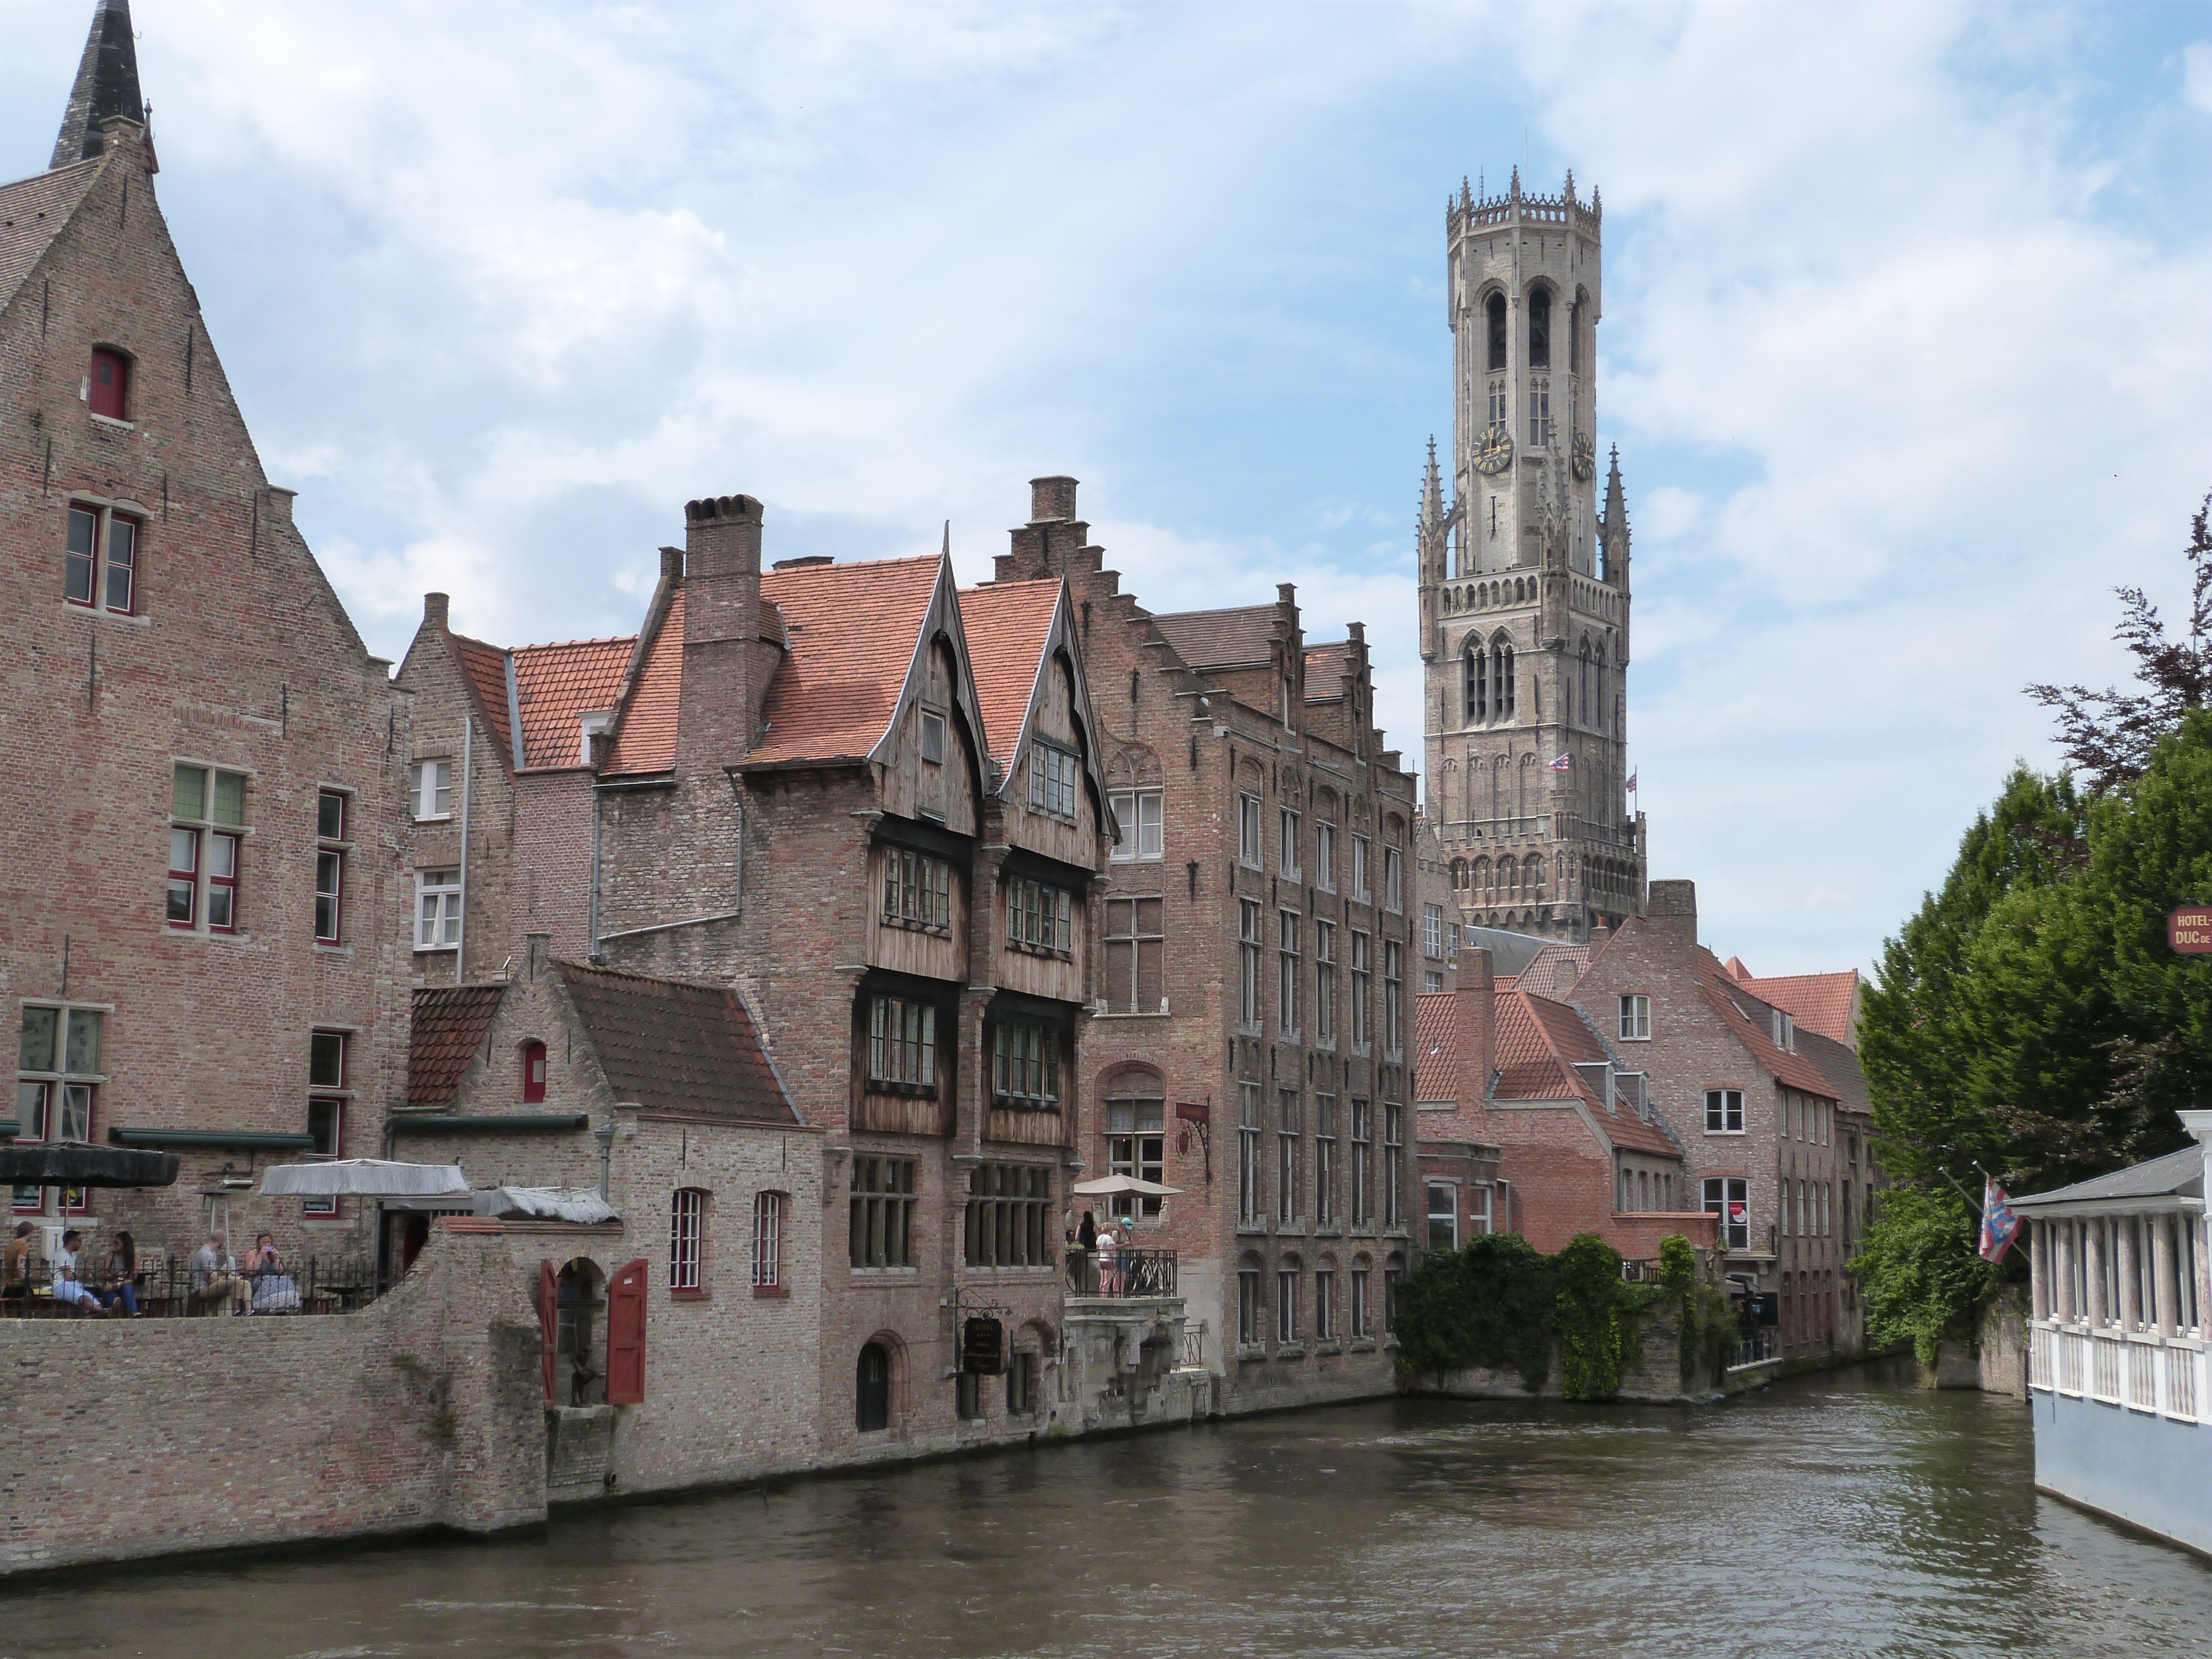 Expect more on Bruges soon